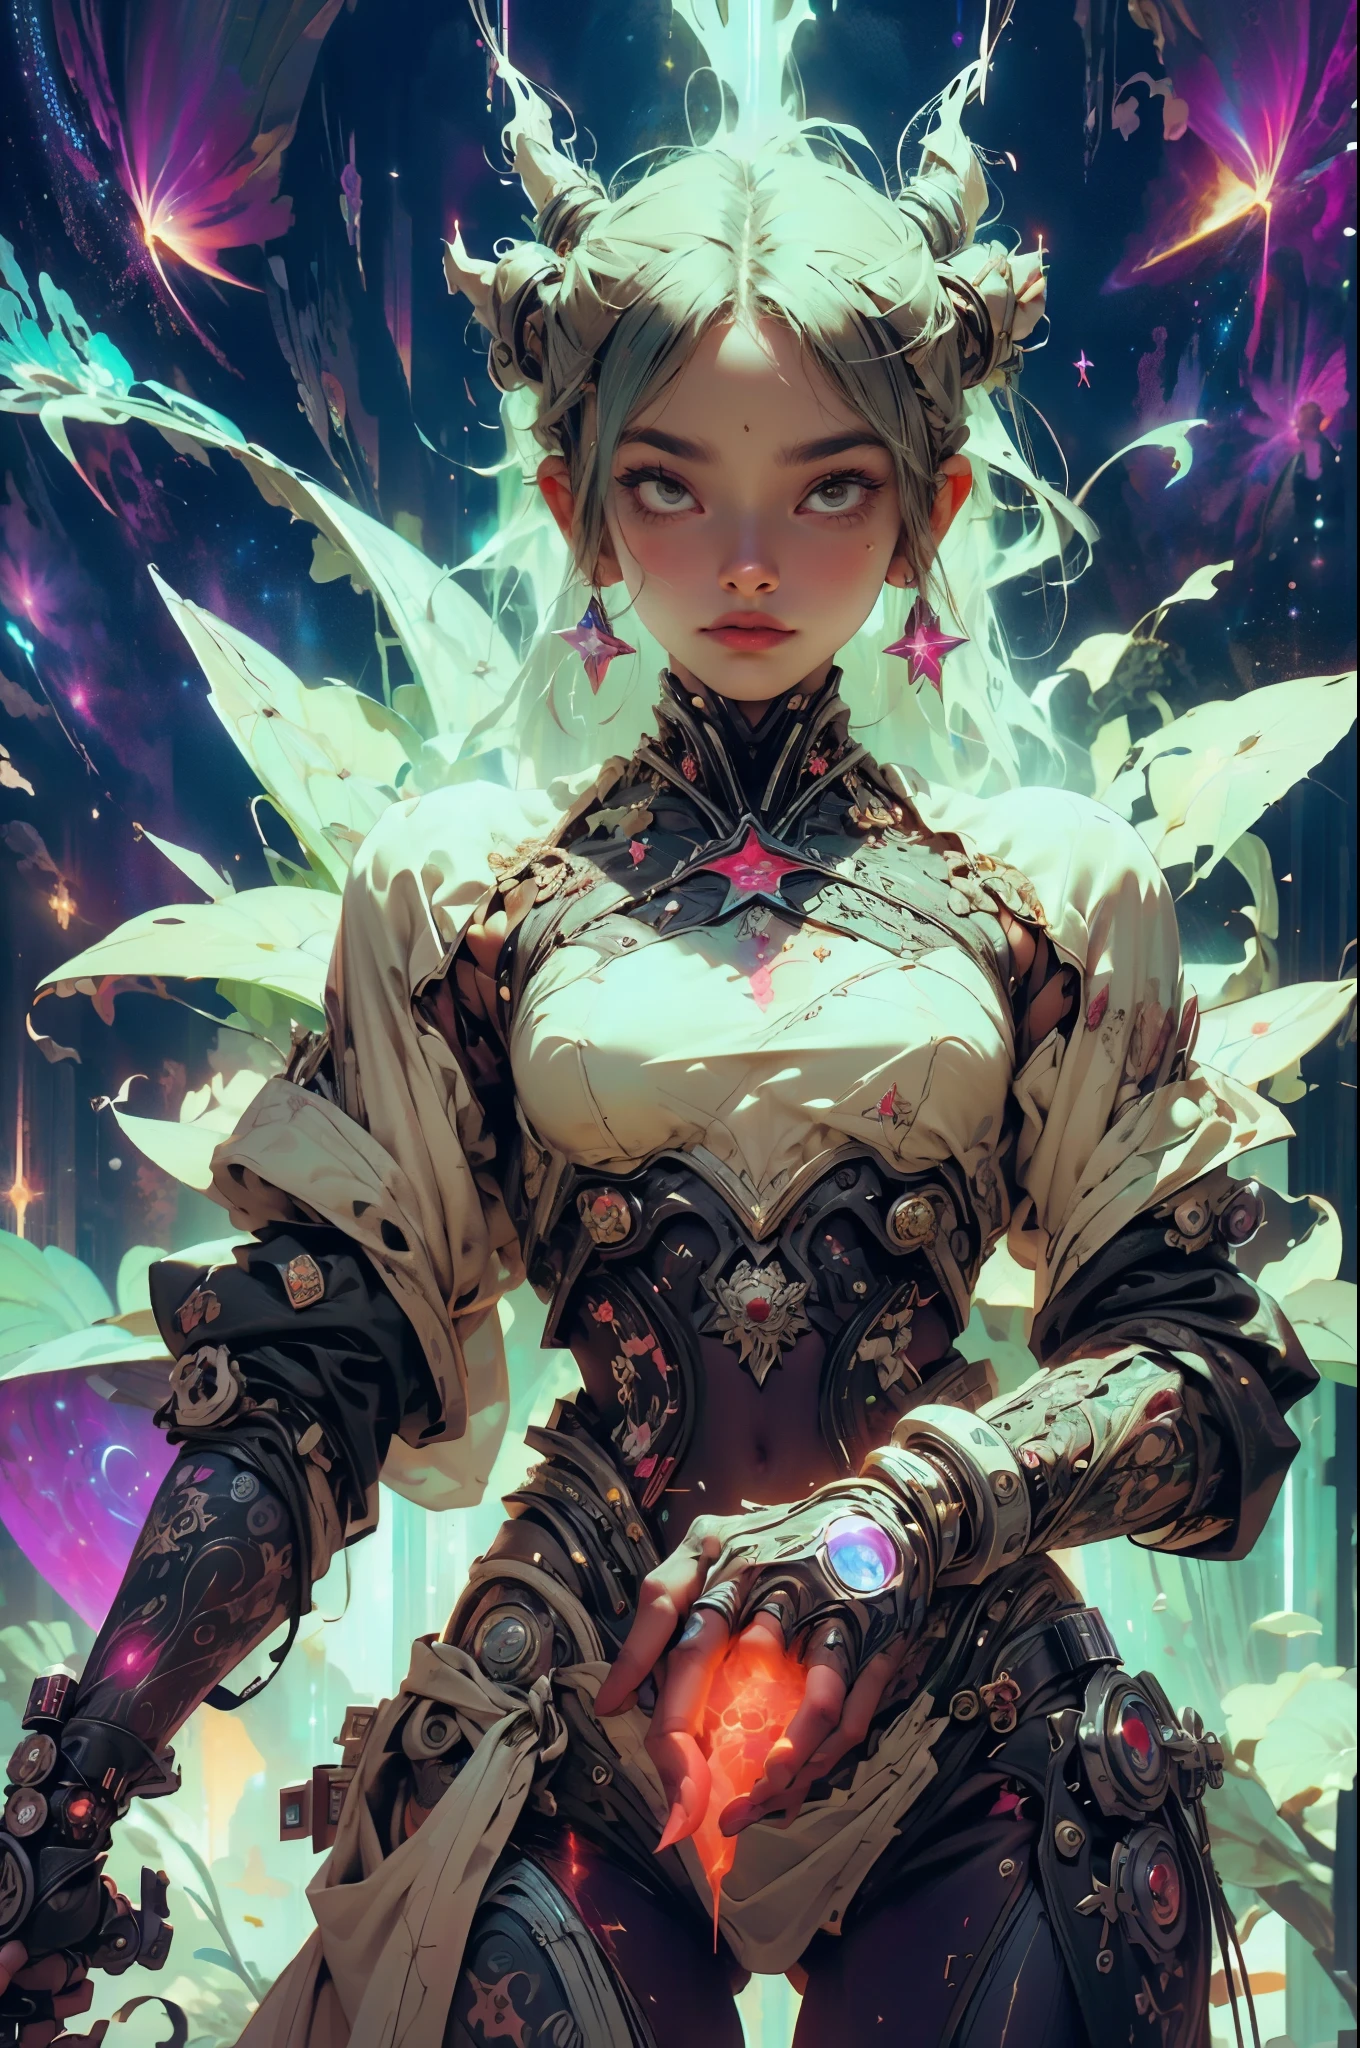 there is a screenshot of a woman in a space suit, a cosmic girl, an event, cosmic entity, incriminate content details, an endless cosmos in the background, historical event, real event, an astral background, cosmic background, cosmic goddess, cyborg goddess in cosmos, celestial cosmos, game interface, violet battlefield theme, cosmic style, hyperdetailed content, background details